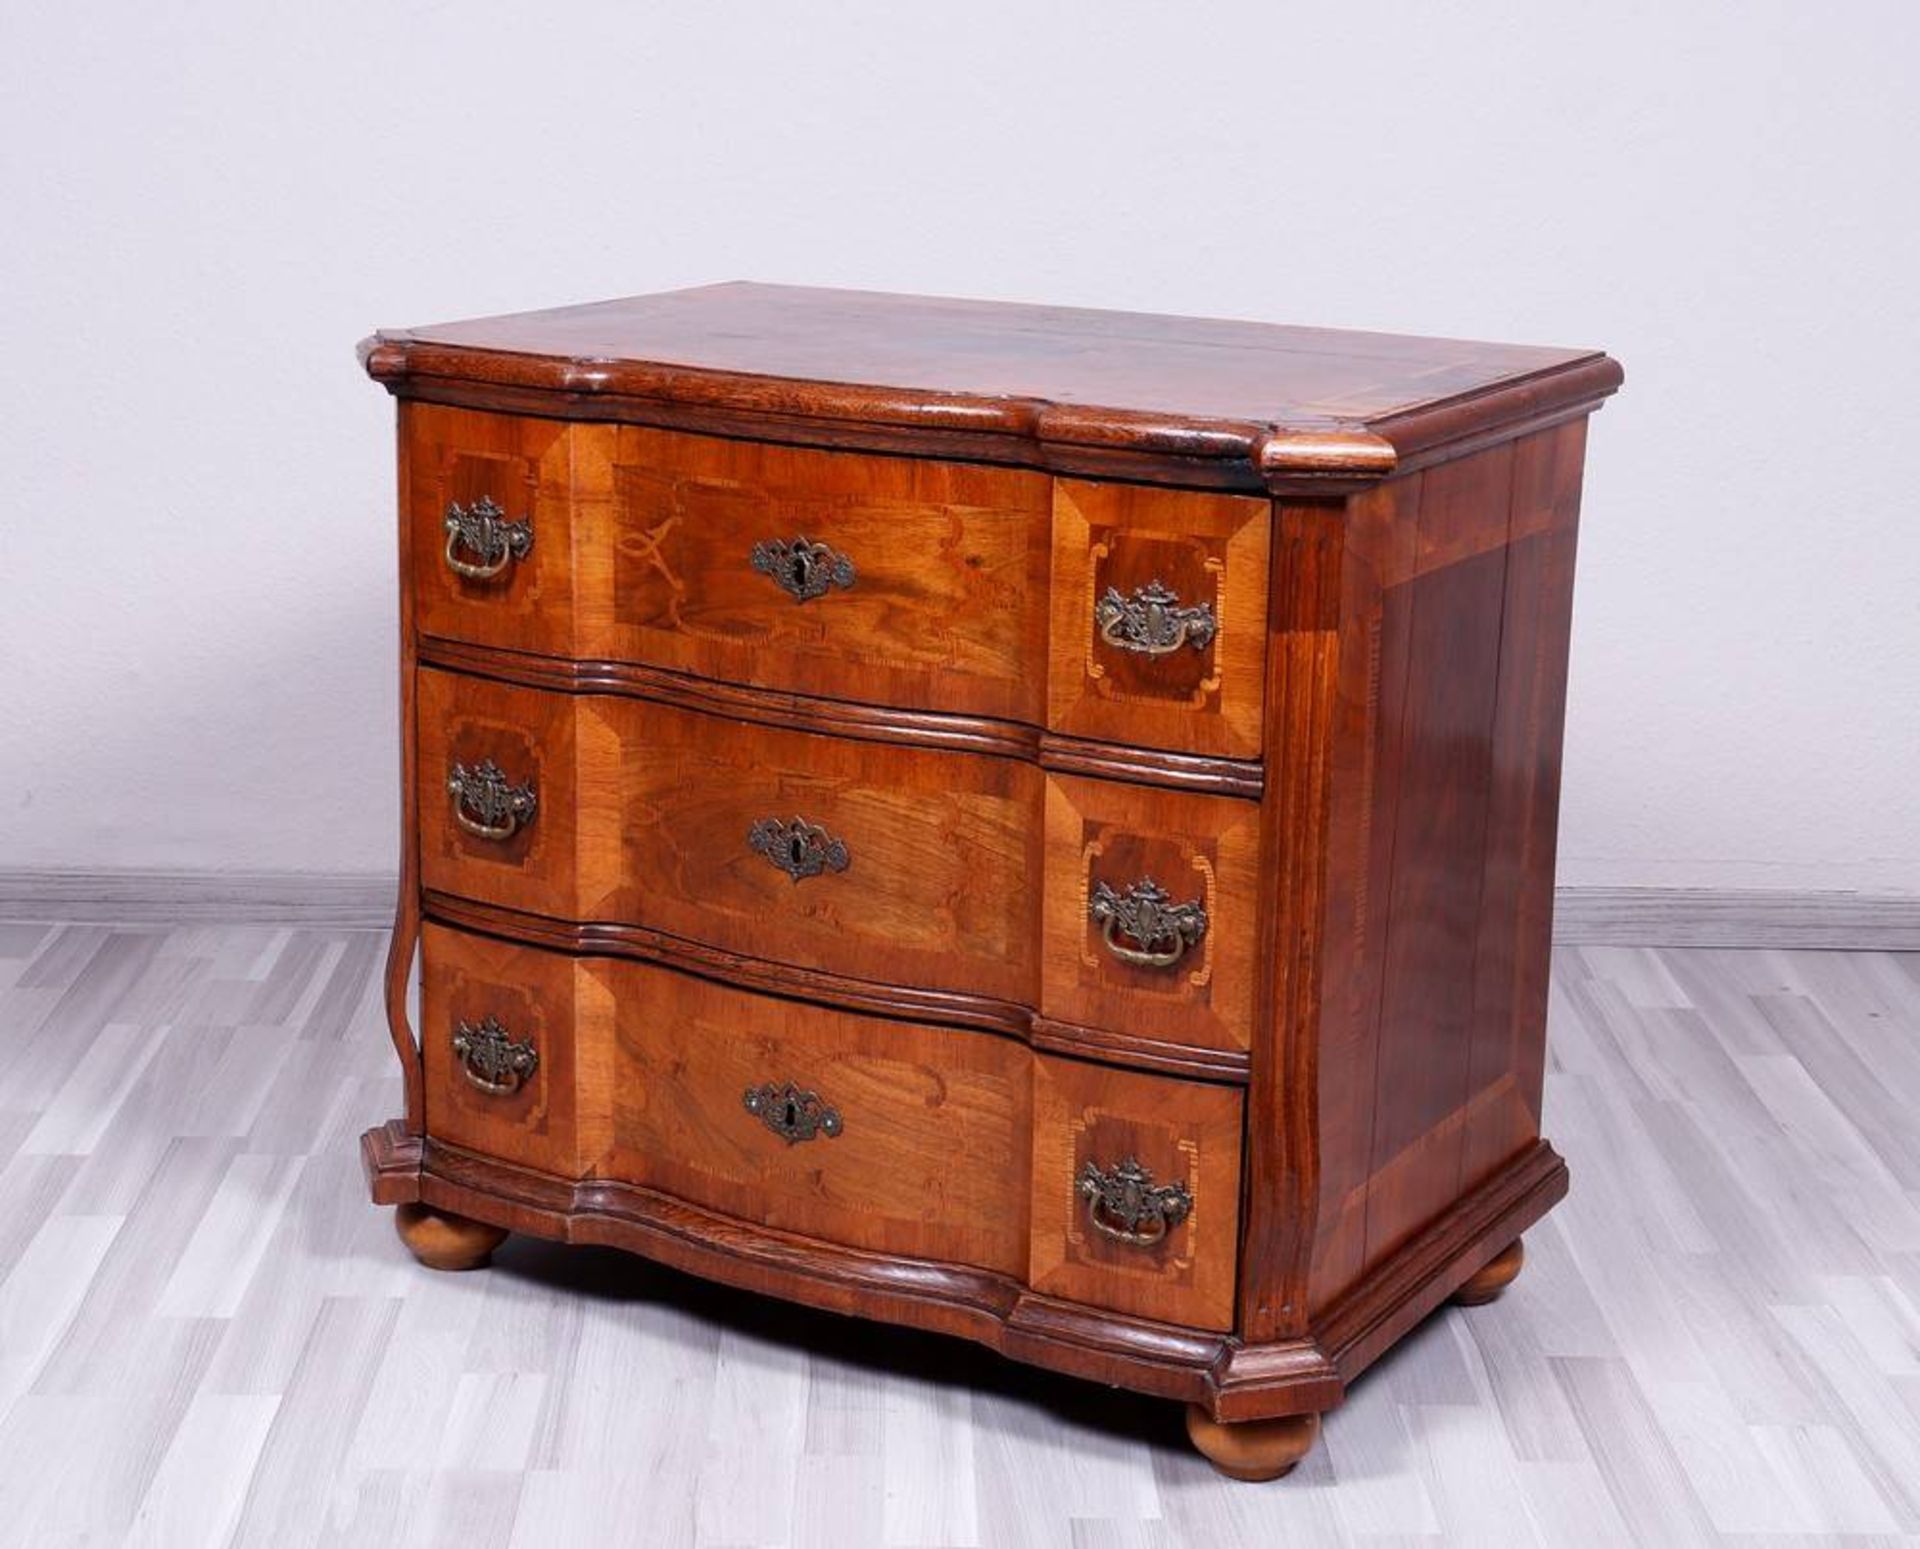 Small baroque chest of drawers German, 19th C., walnut a.o., HxWxD: 77,5x89x55cm, signs of age,